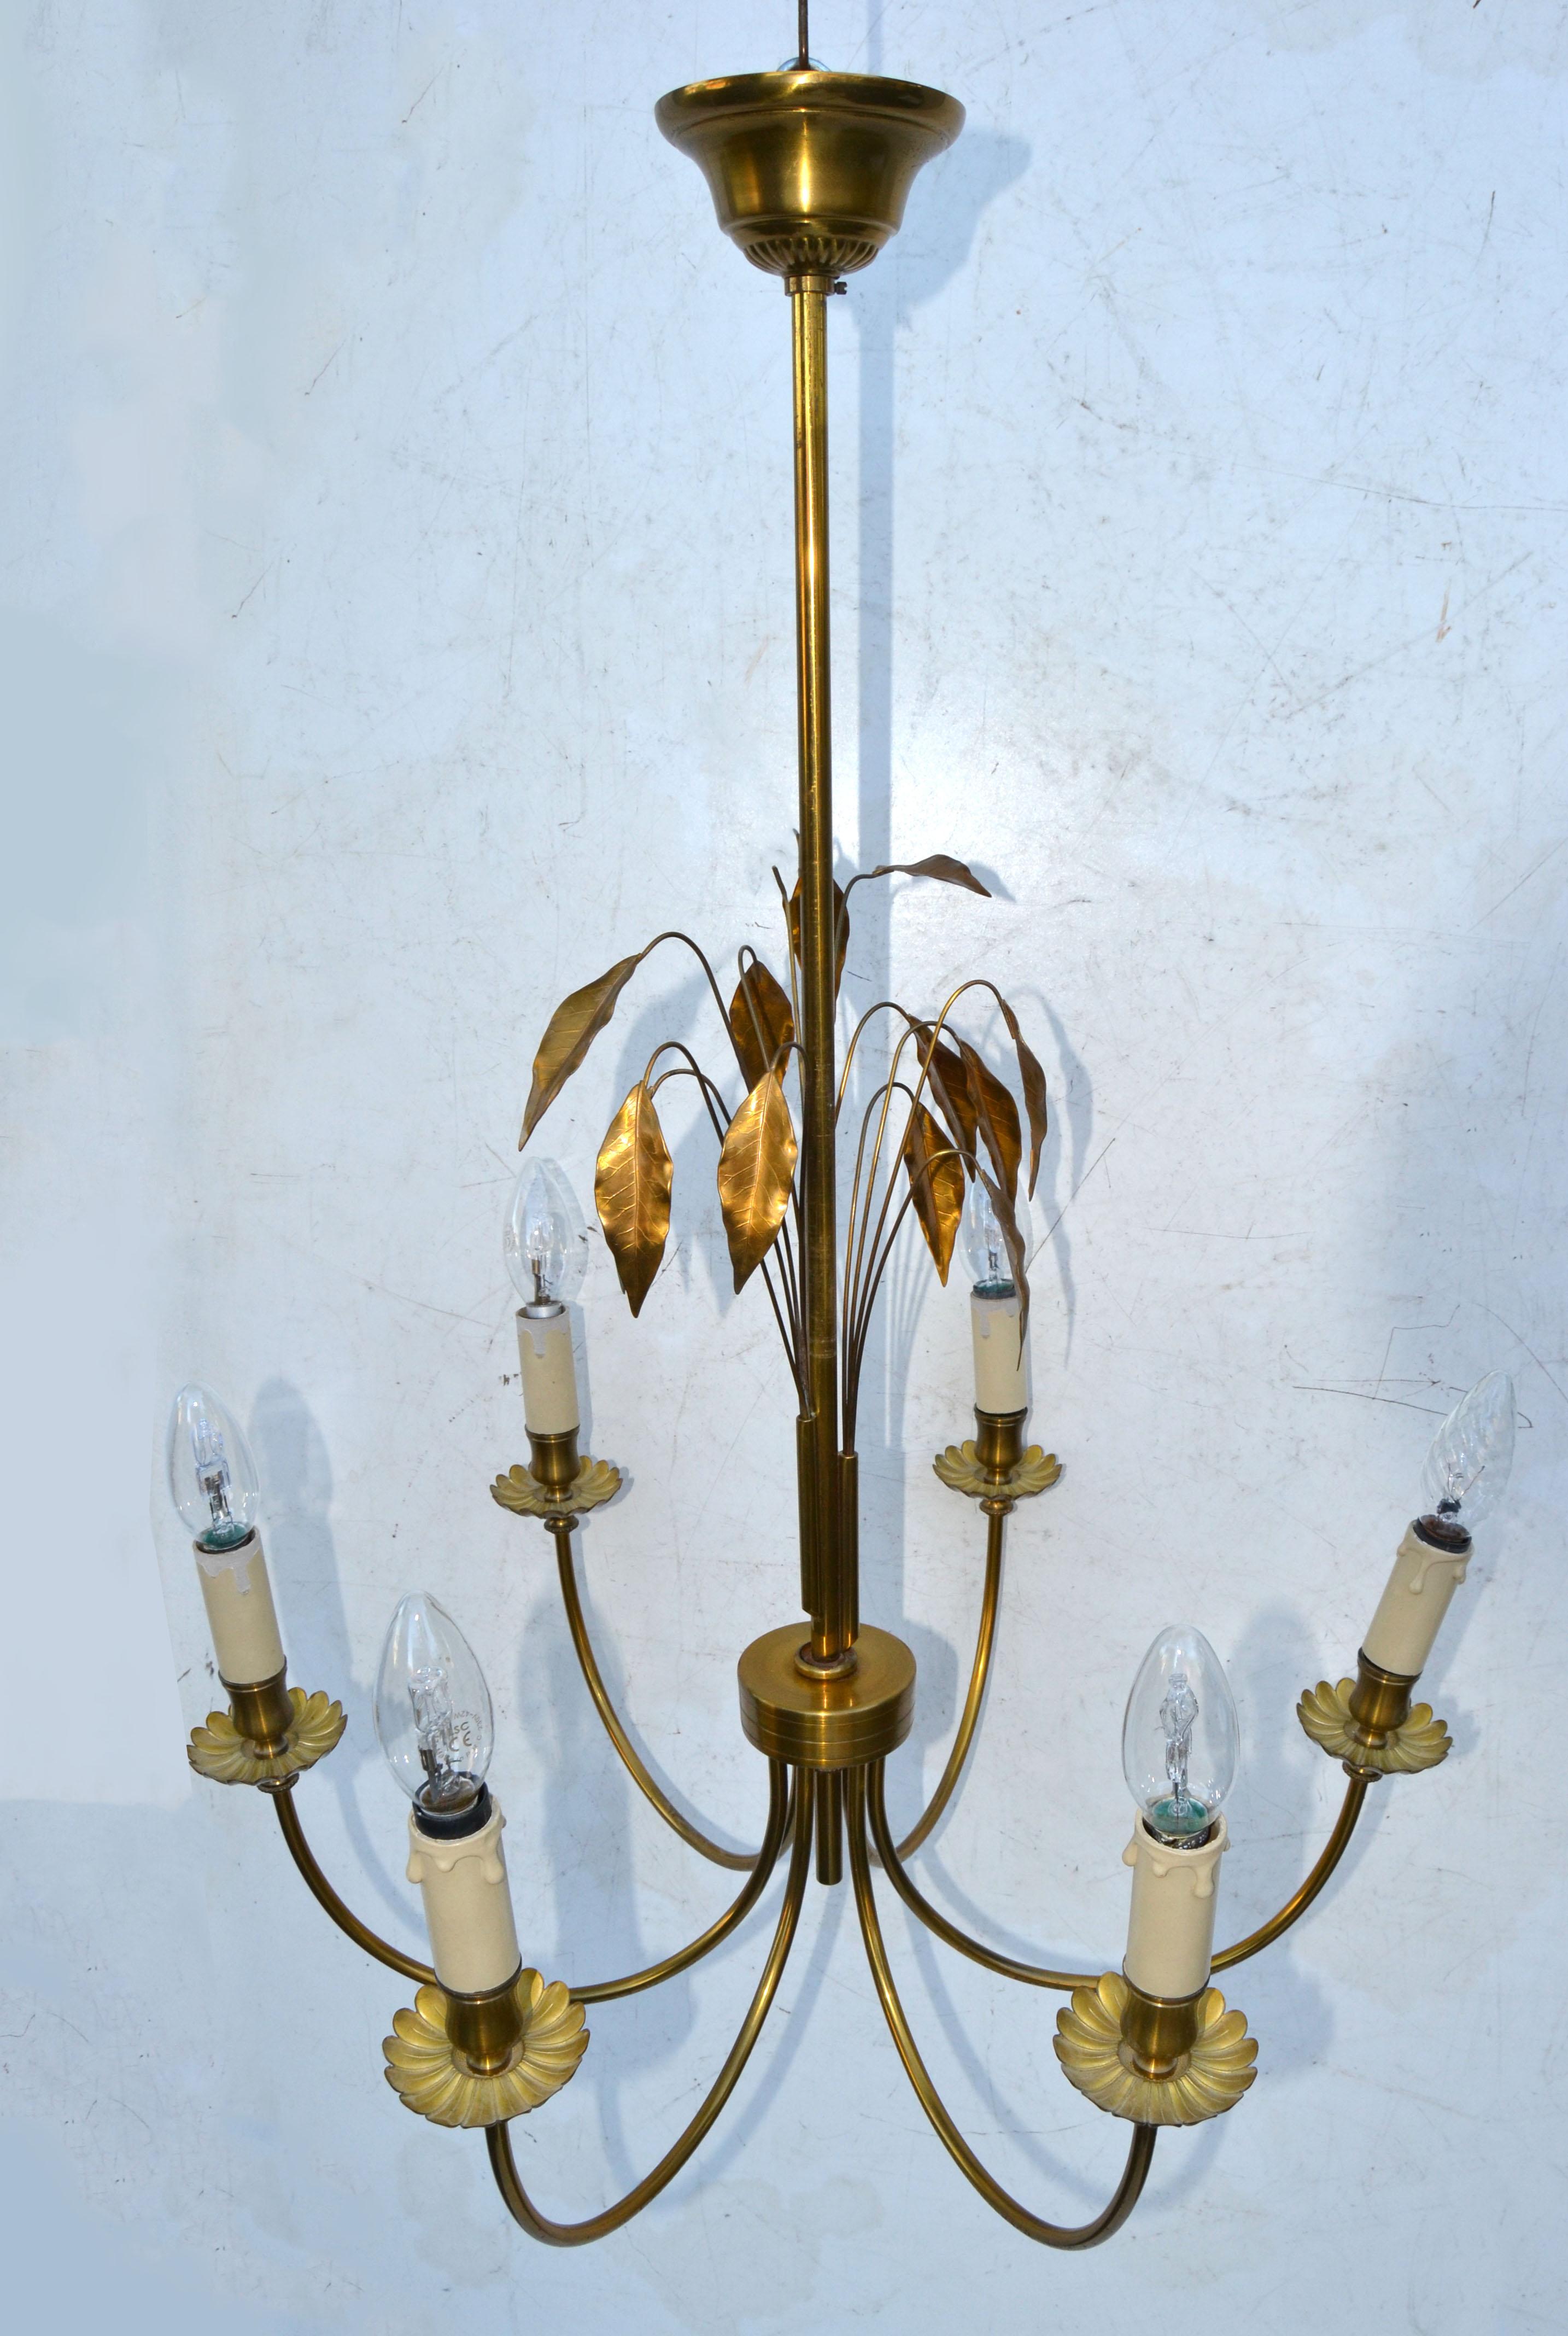 Maison Charles style 6 Light Chandelier 'Feuilles', Brass & Gold leaf Branches in the Center.
Comes with Canopy and takes 6 candelabra E14 light bulbs, max 40 watts.

 
 